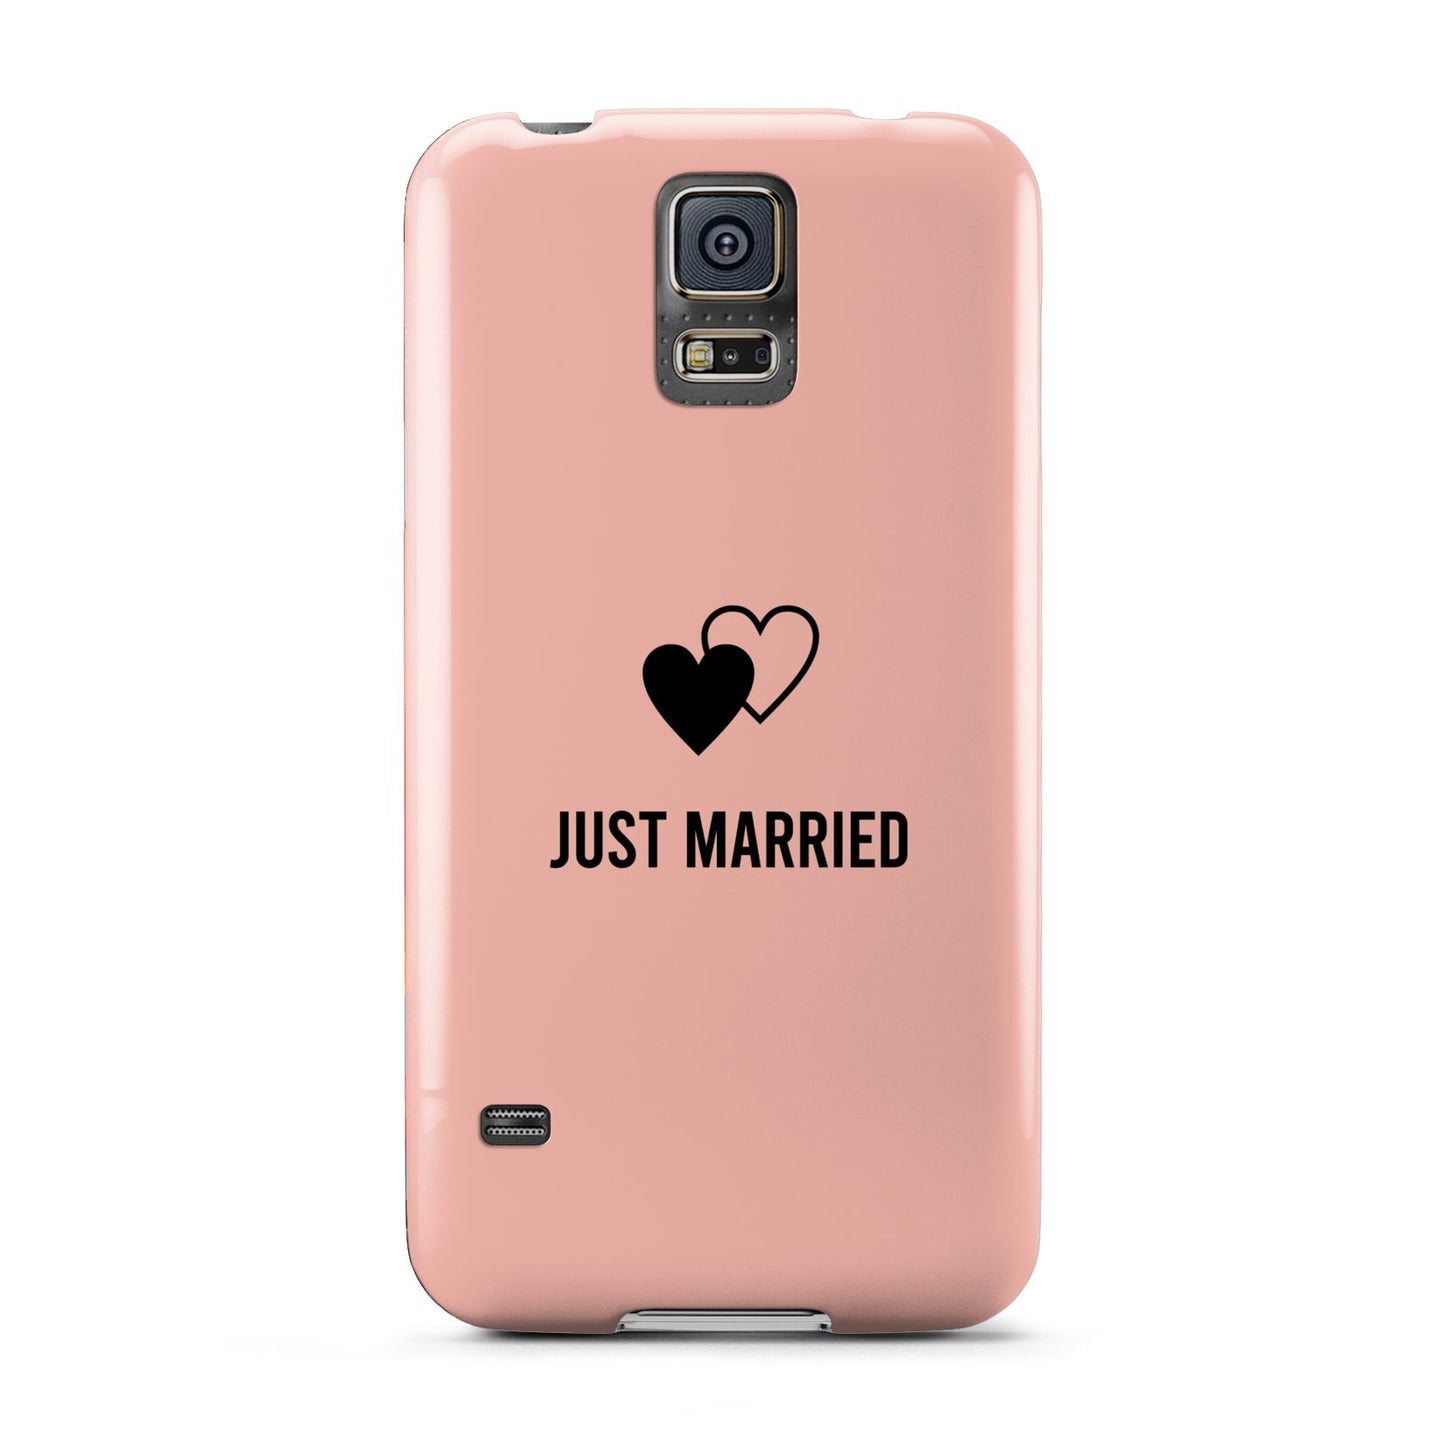 Just Married Samsung Galaxy S5 Case